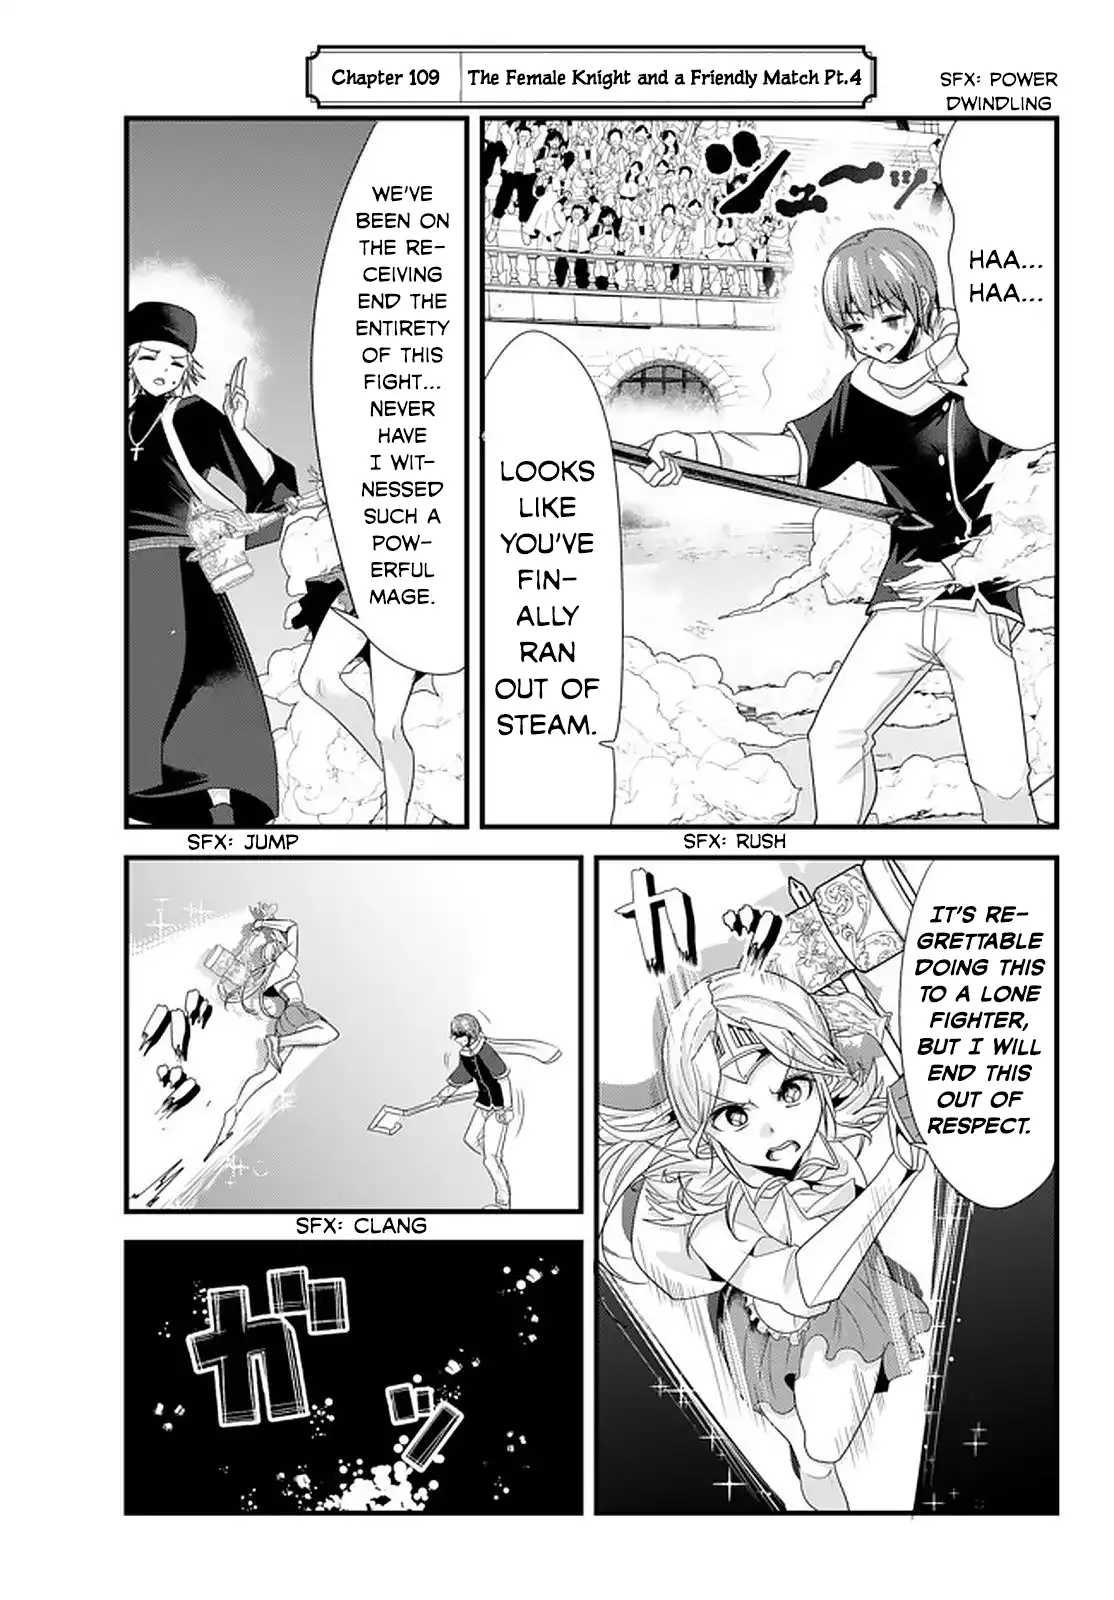 A Story About Treating a Female Knight, Who Has Never Been Treated as a Woman, as a Woman - Chapter 109 Page 1